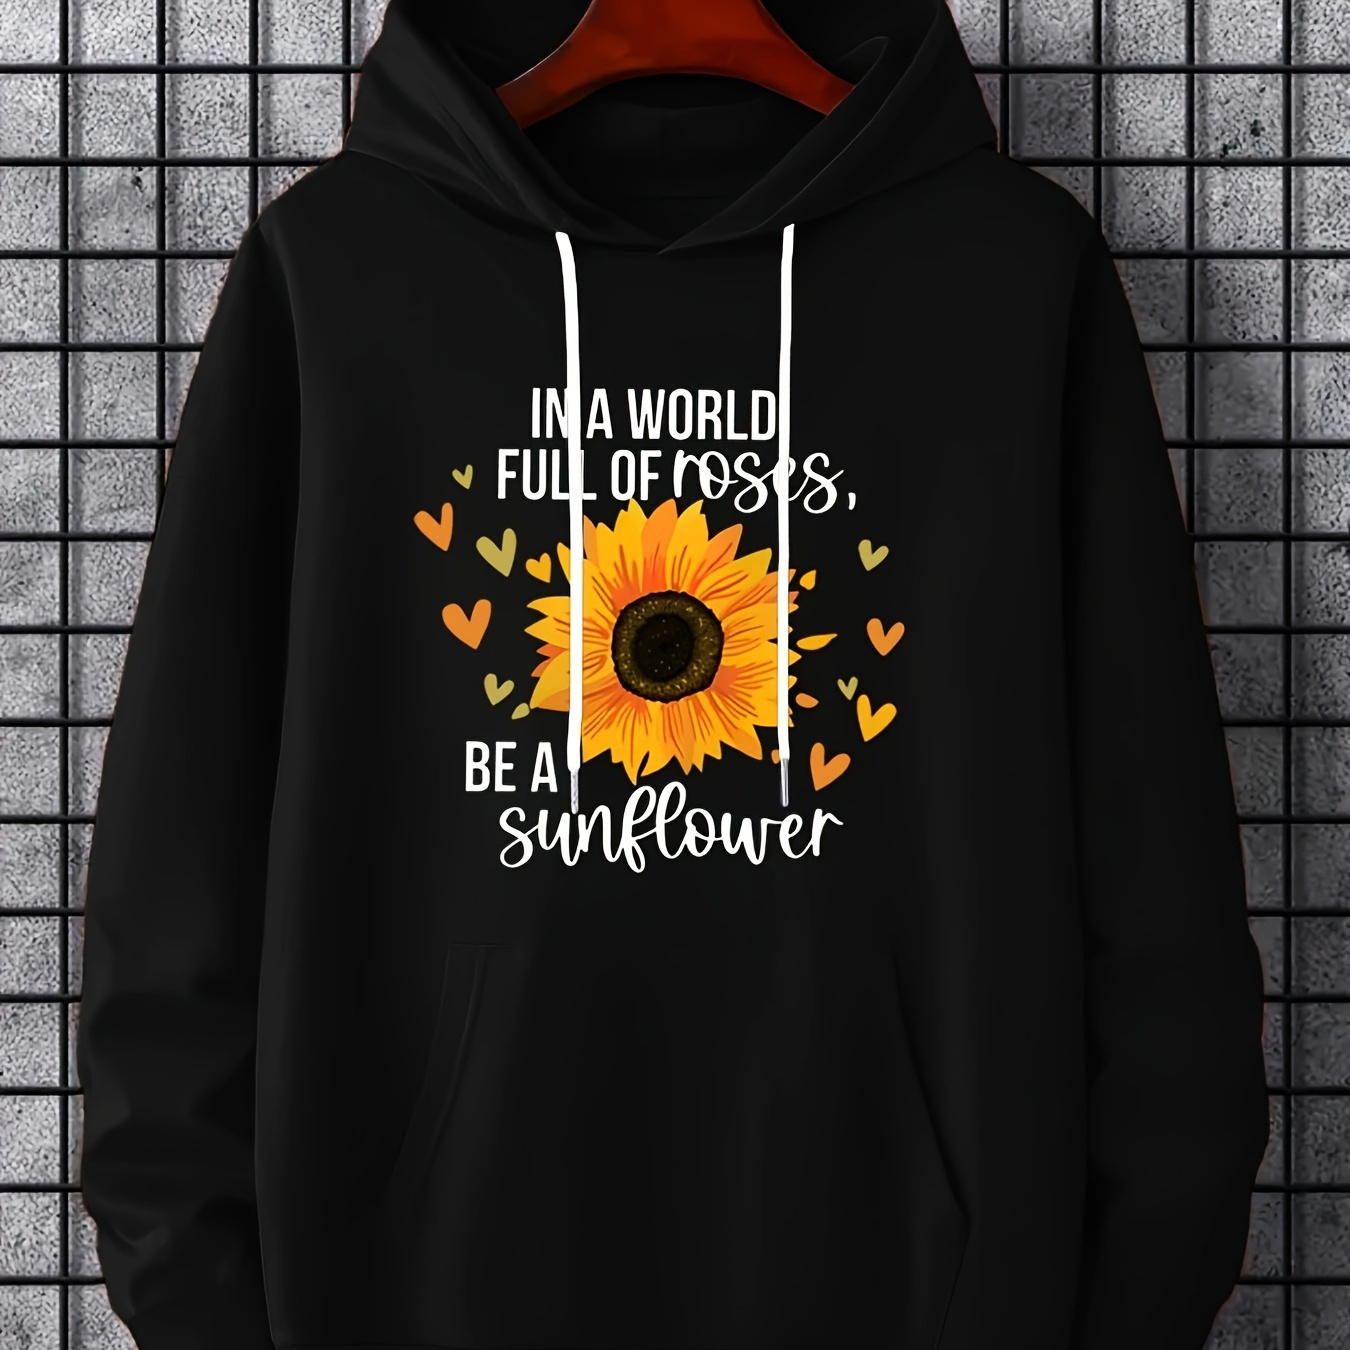 

Plus Size Men's Sunflower Graphic Print Hooded Sweatshirt For Spring Fall, Trendy Casual Tops For Big & Tall Males